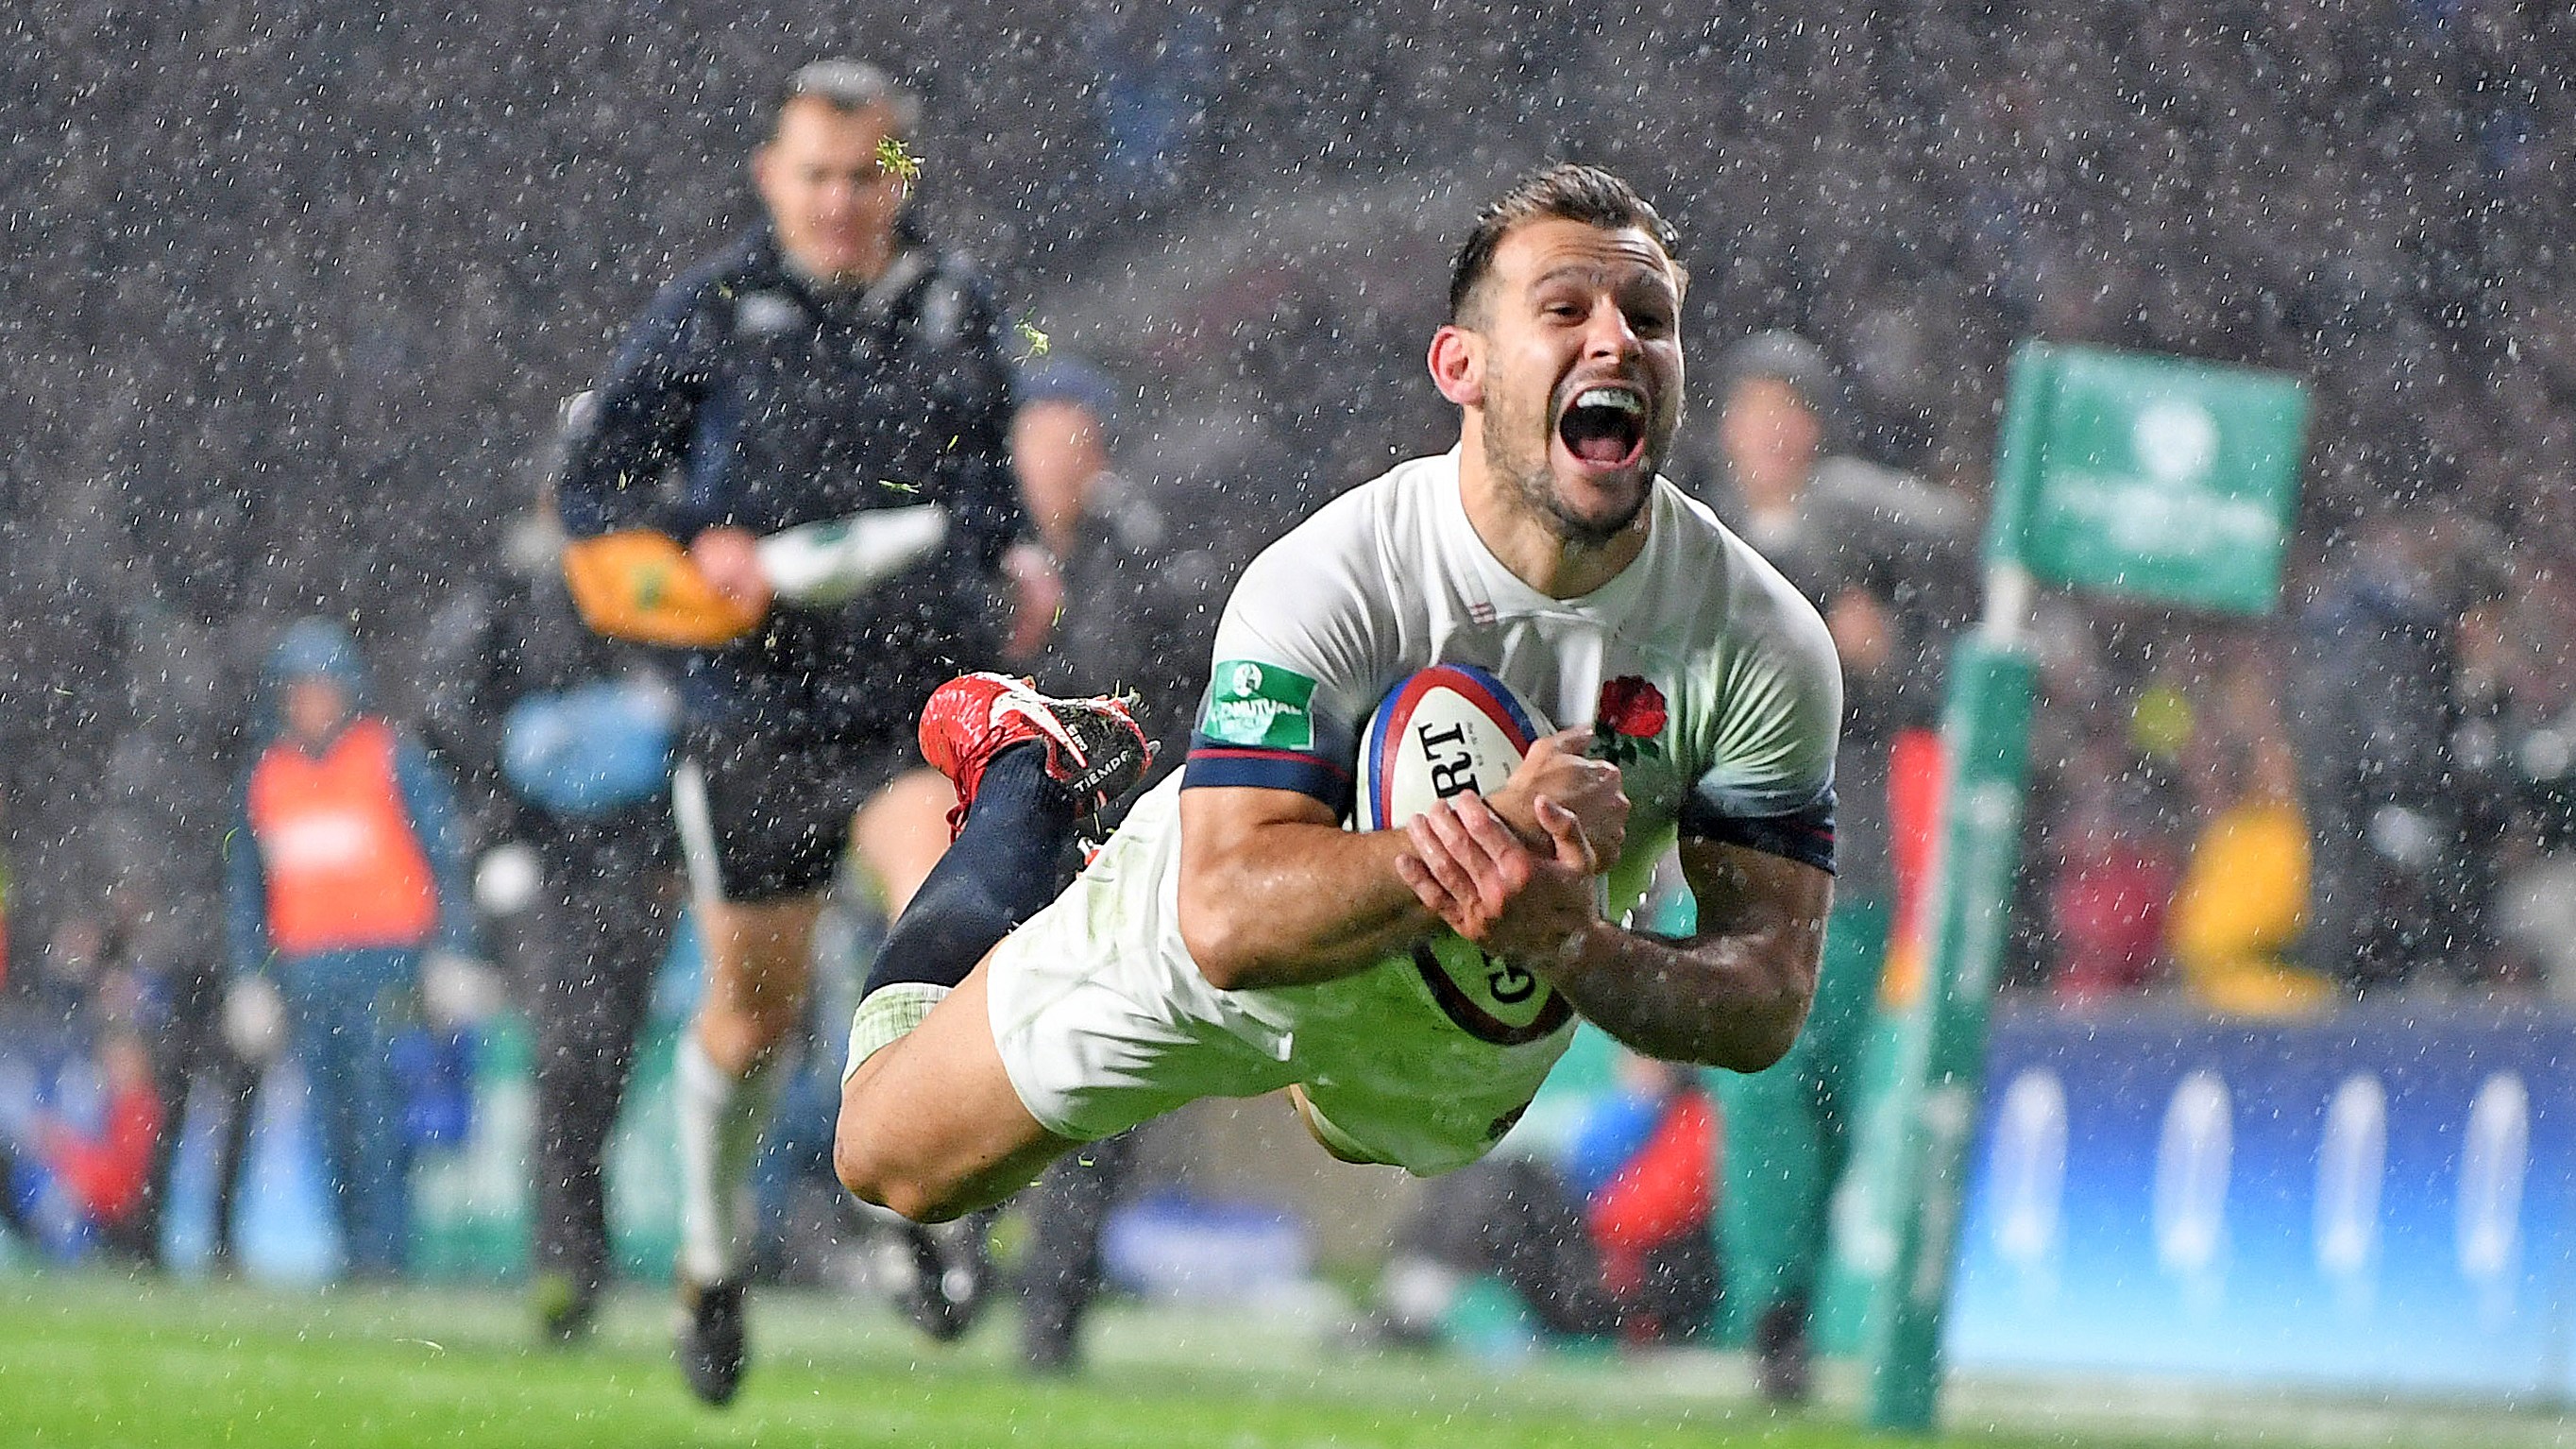 101 caps and out – Danny Care retires from England duty